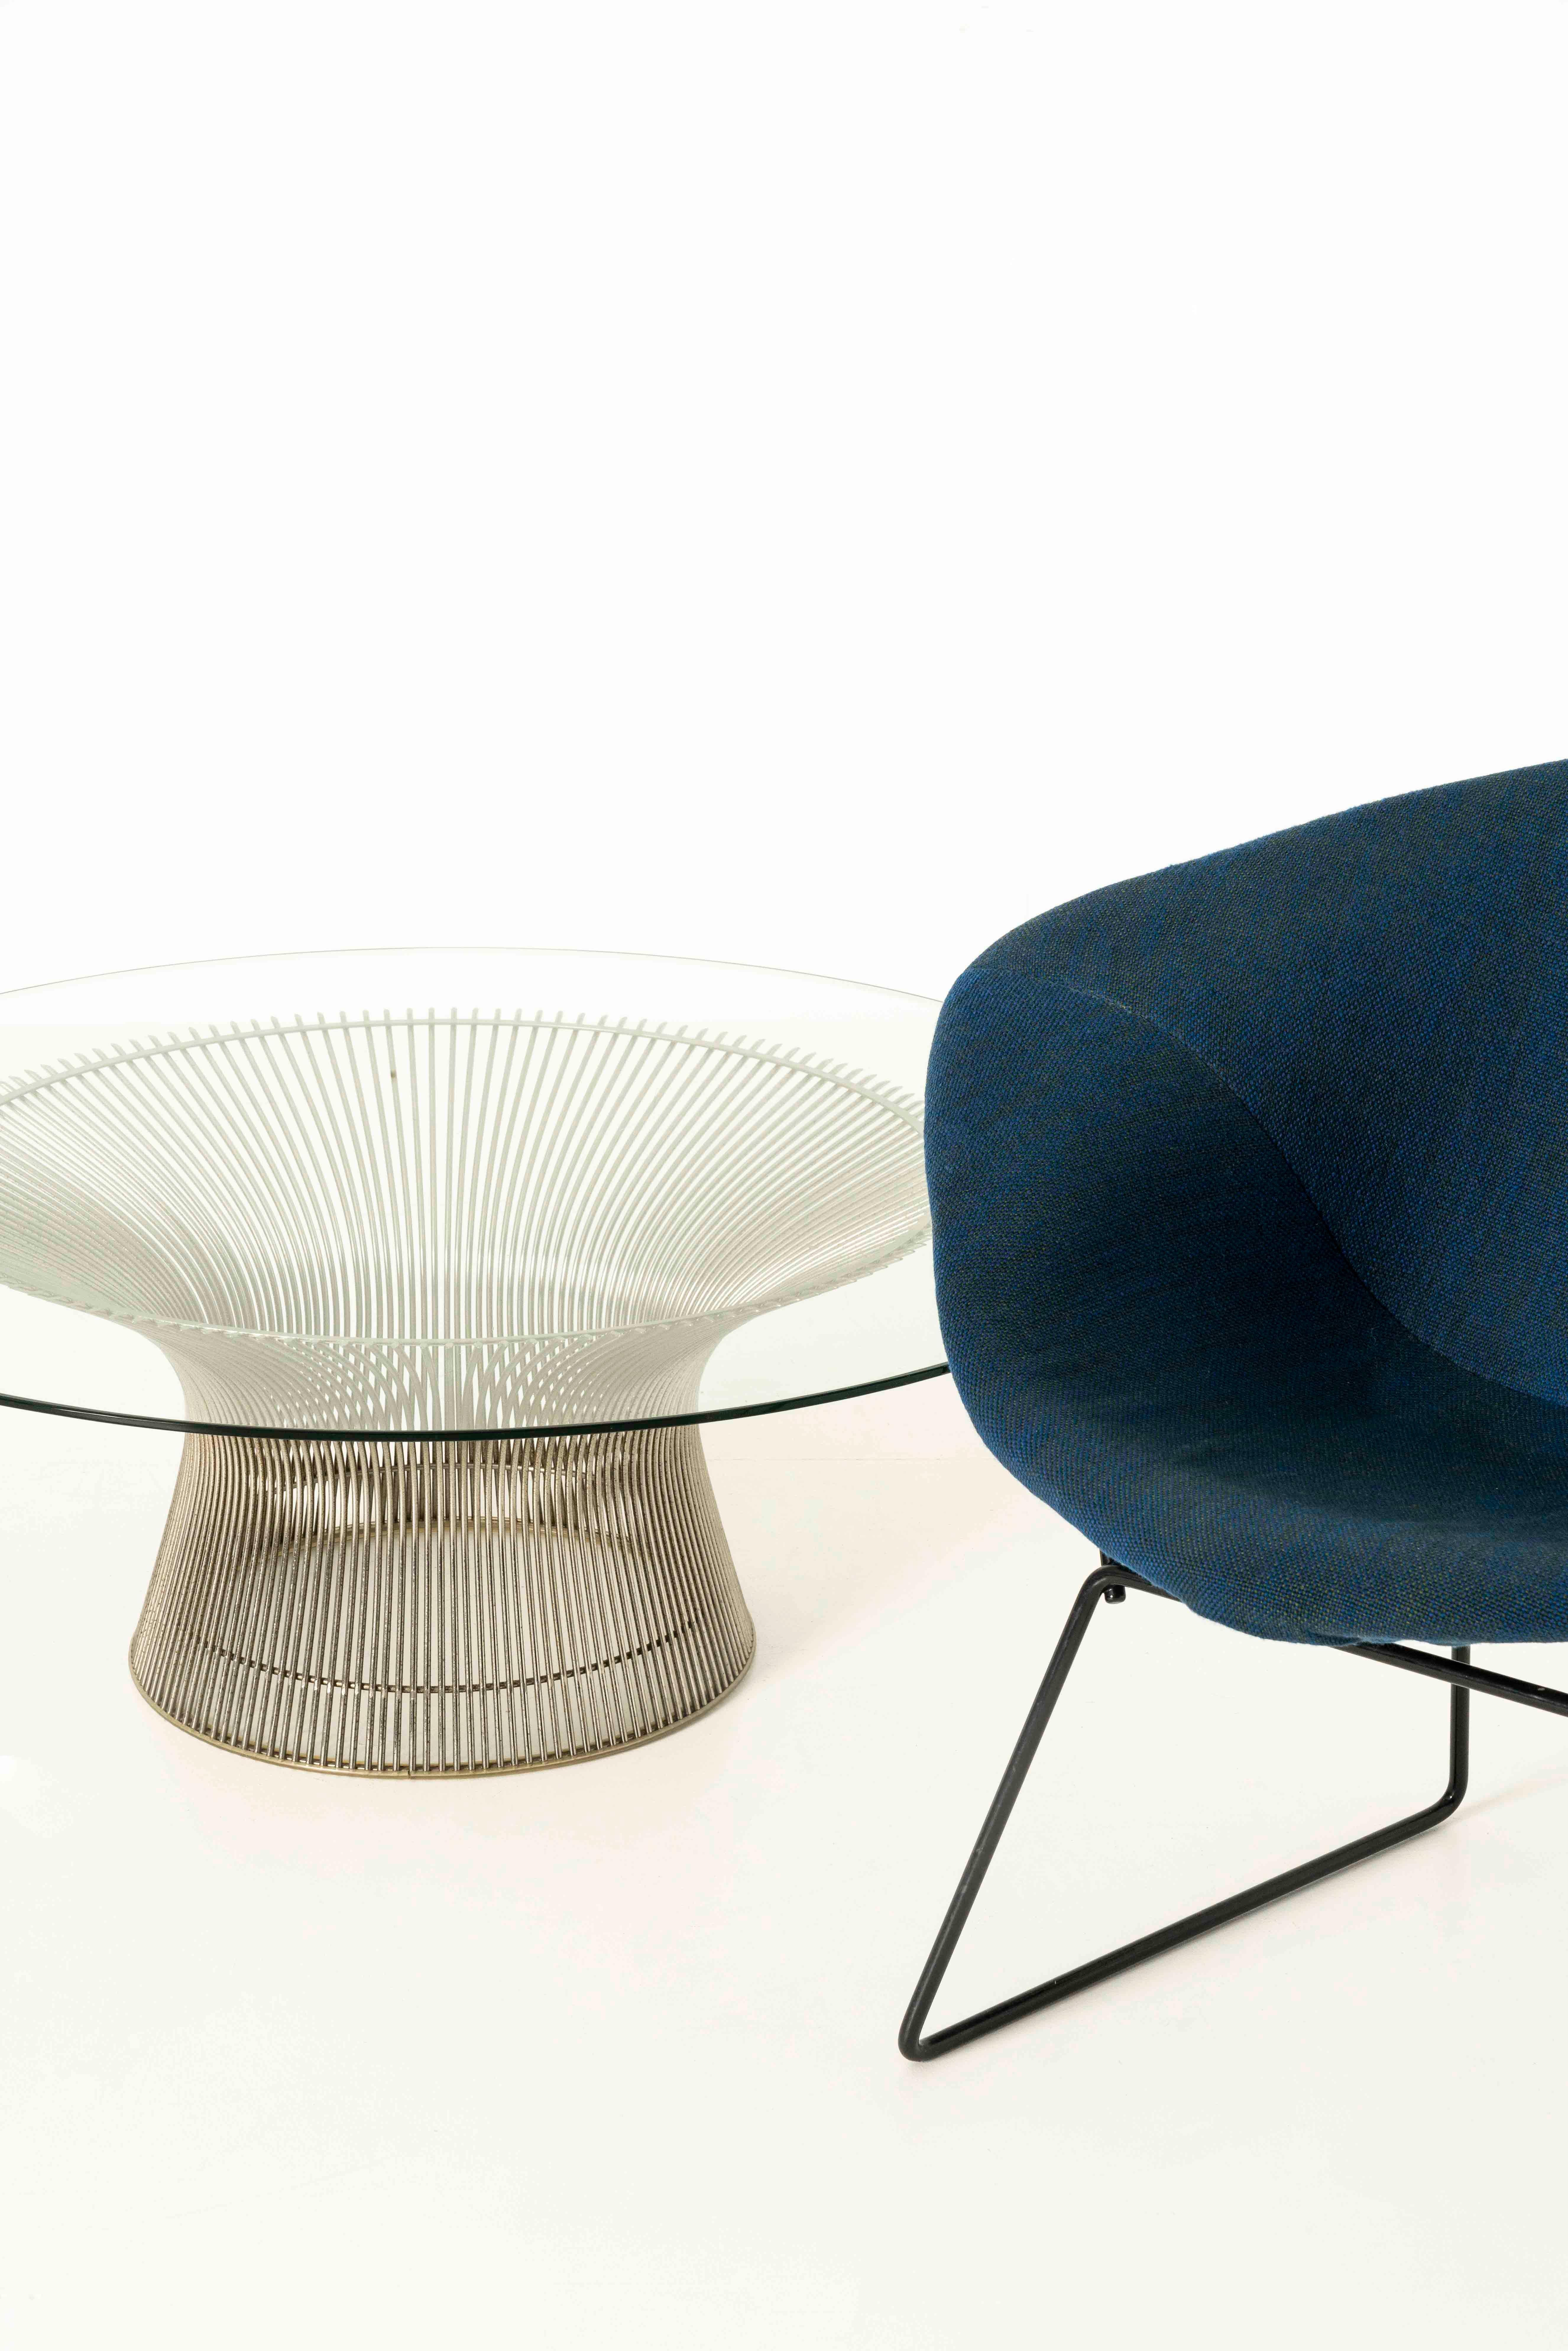 Warren Platner Coffee Table for Knoll with Glass and Nickel, USA 1970s 6